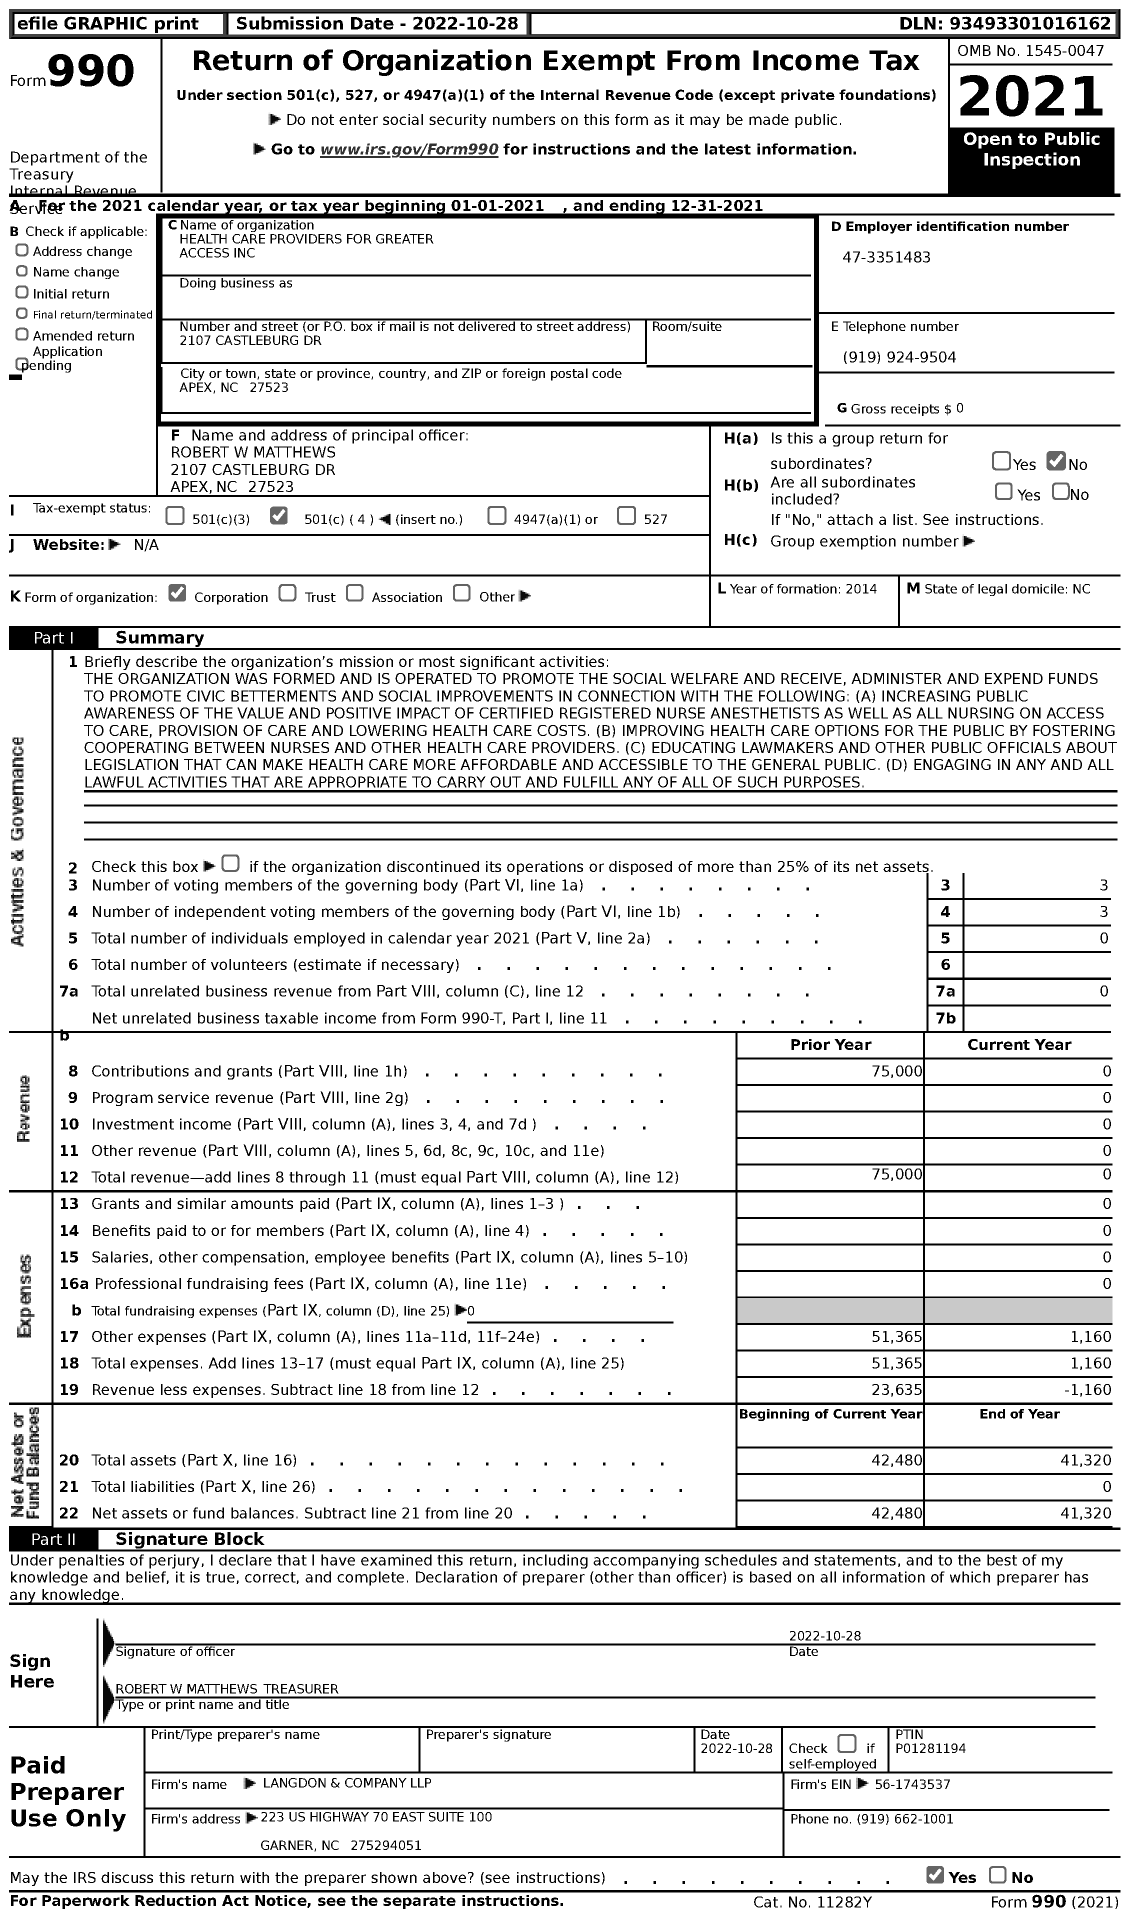 Image of first page of 2021 Form 990 for Health Care Providers for Greater Access